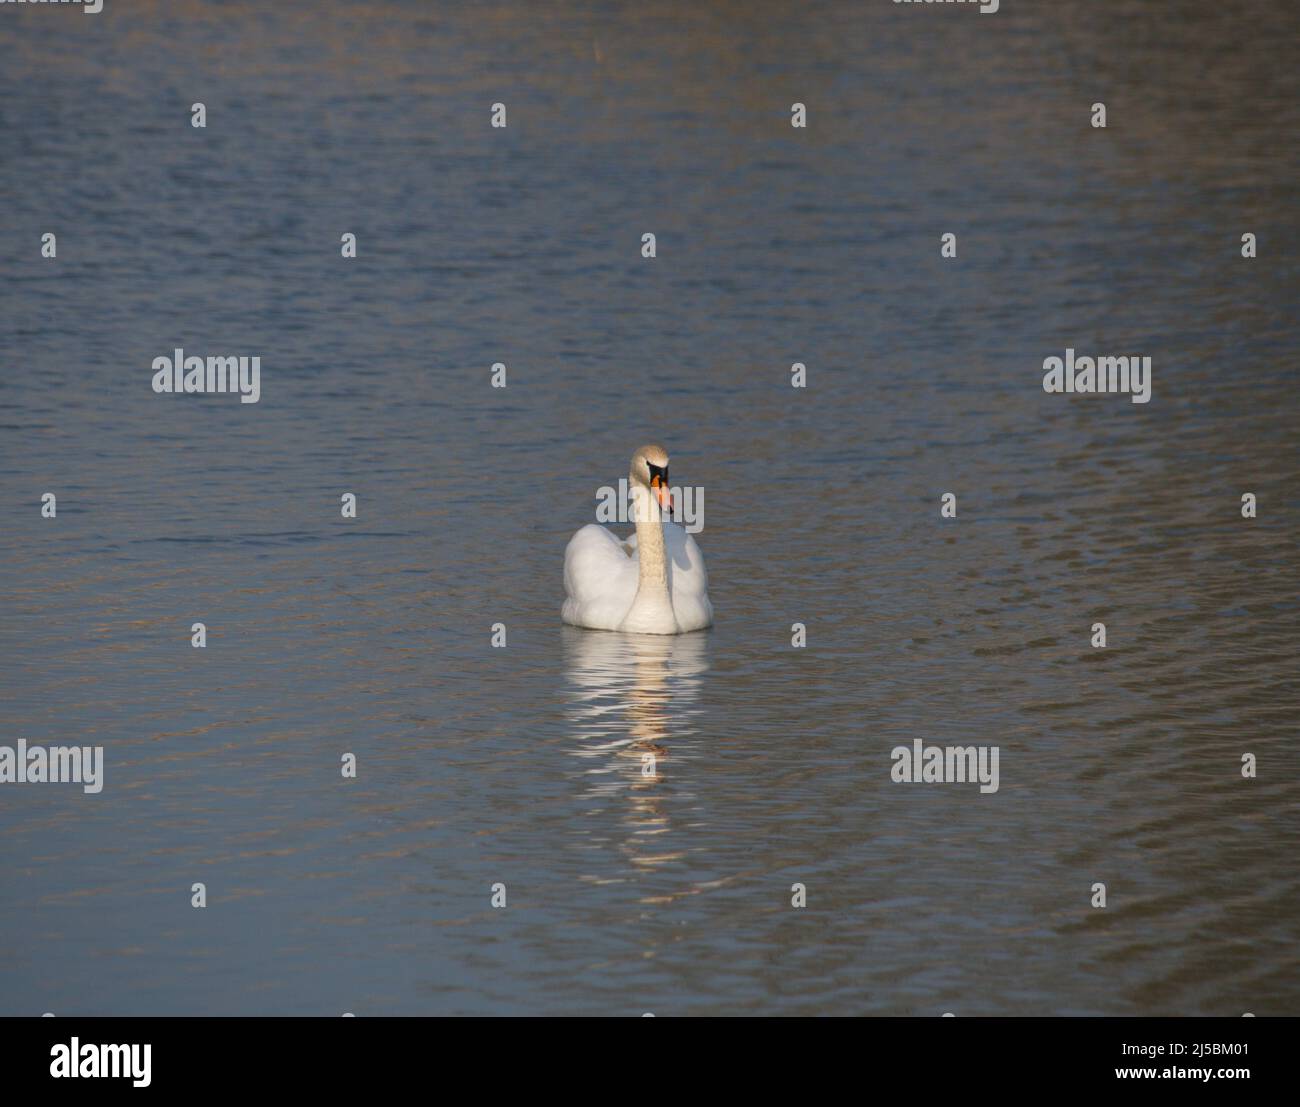 Photography of a swimming swan on lake Stock Photo